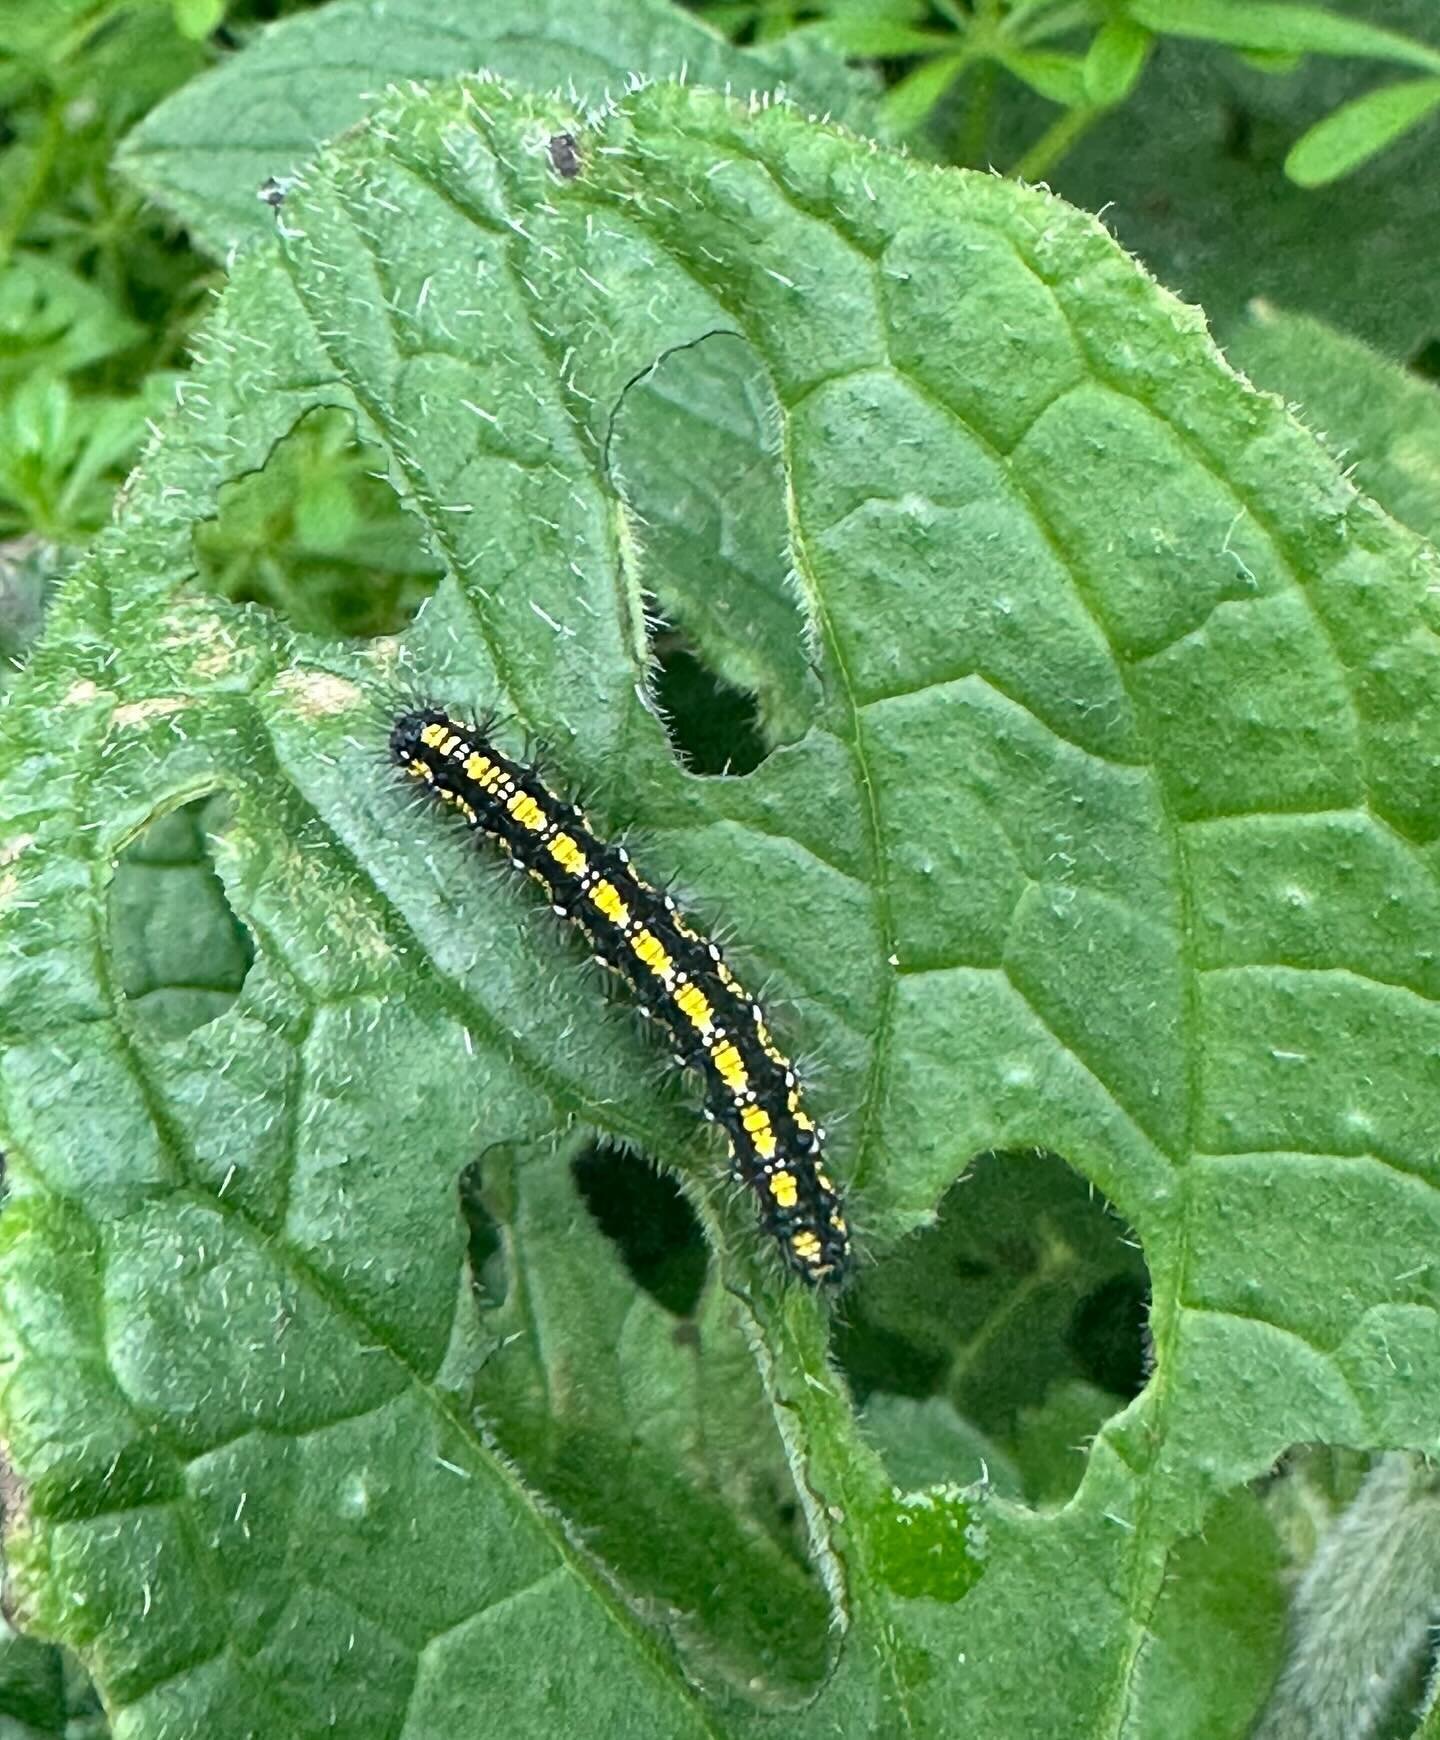 The Scarlet Tiger moth caterpillars (Callimorpha dominula) are busy fattening up at Chalkhill. The caterpillars eat &ldquo;weeds&rdquo; such as comfrey, white dead-nettle, bramble and nettles before they emerge as beautiful moths. Leaving a patch of 